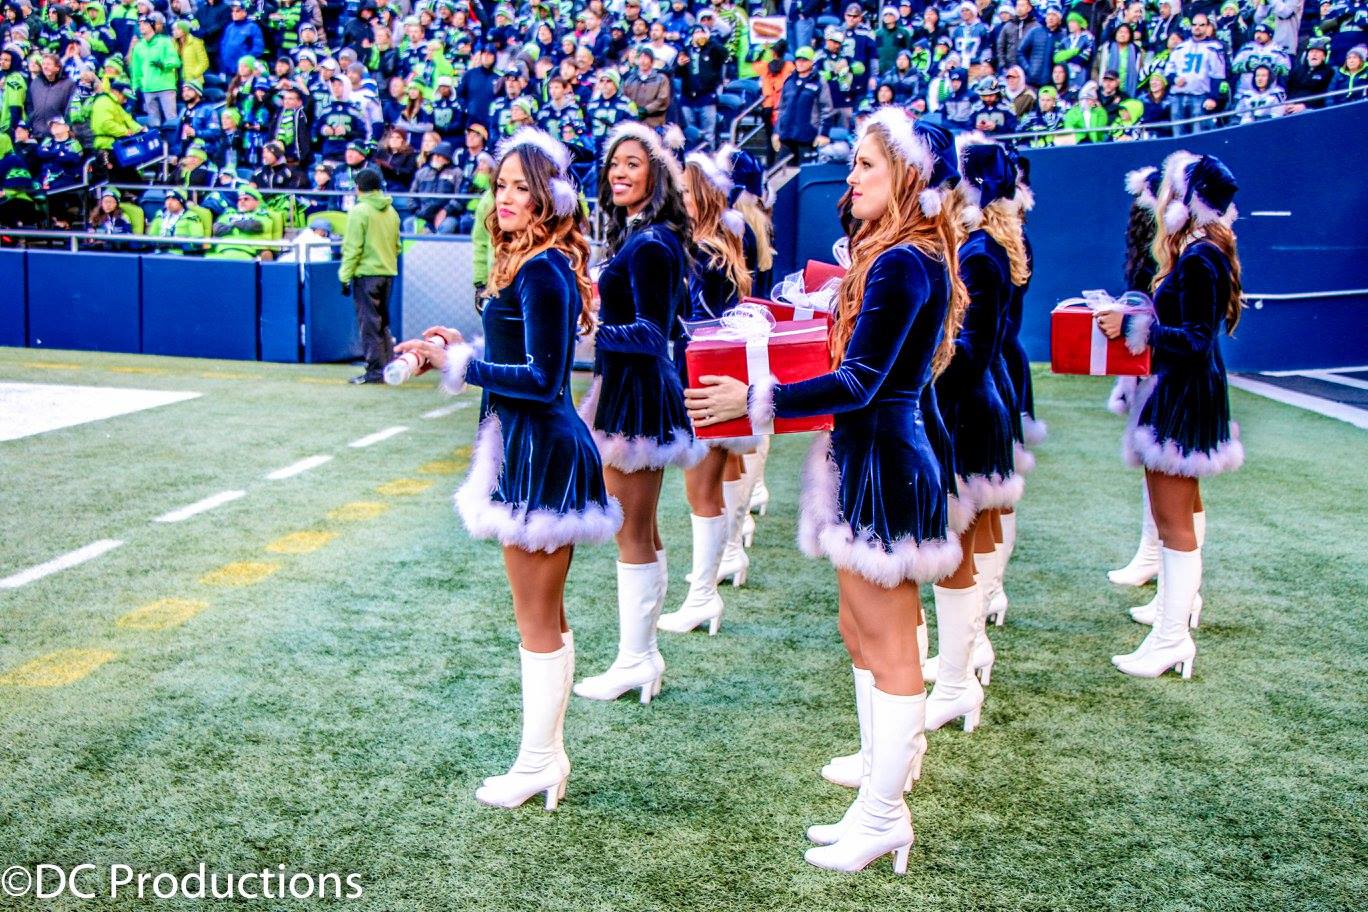 Seagals holiday cheer in Seattle